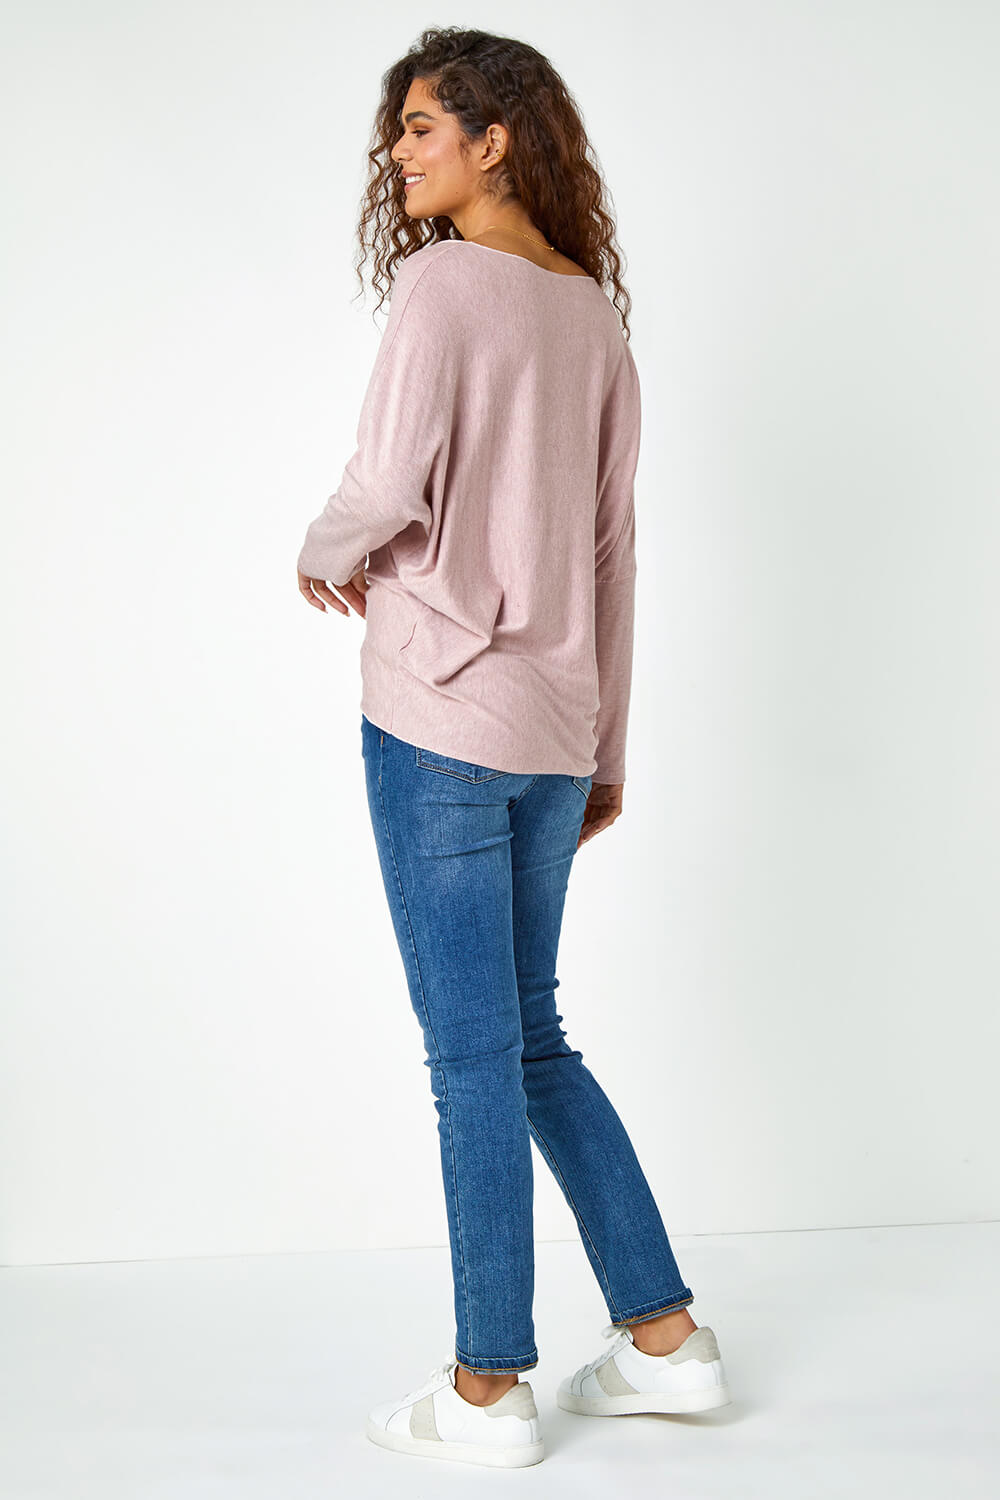 Light Pink Embellished Snowflake Stretch Top, Image 3 of 5